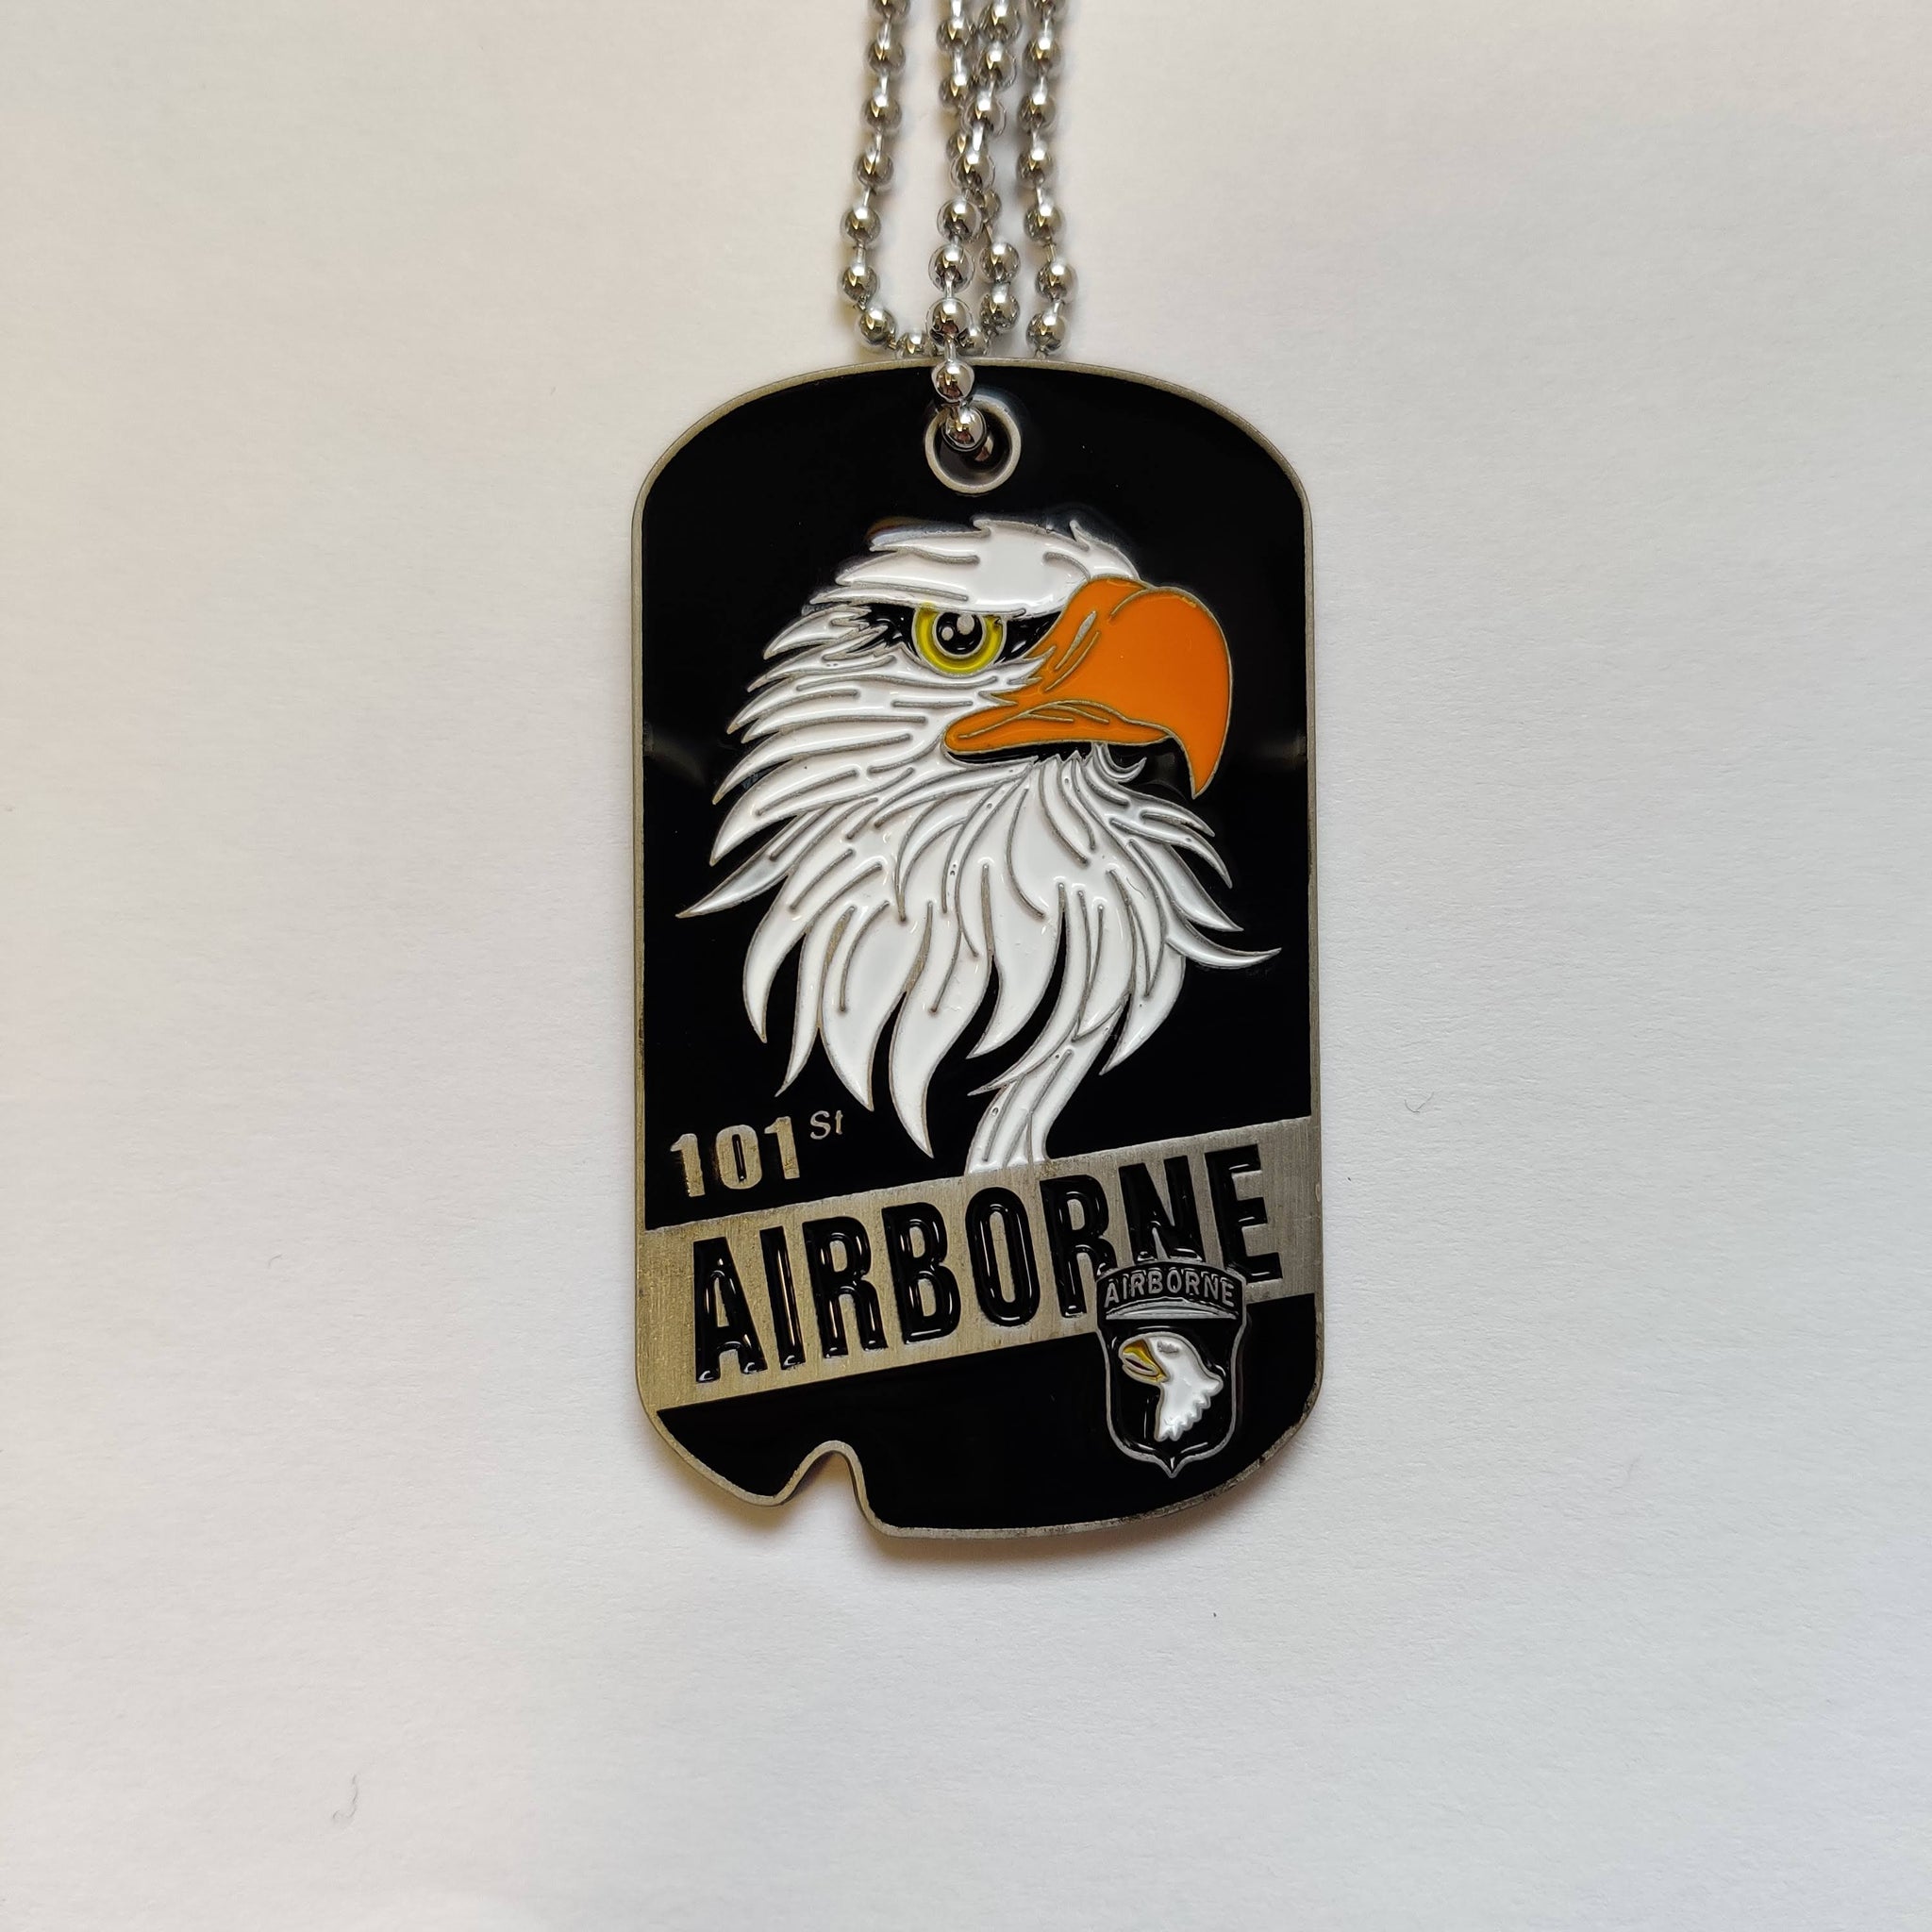 Dogtag 101st Airborne Screaming Eagles